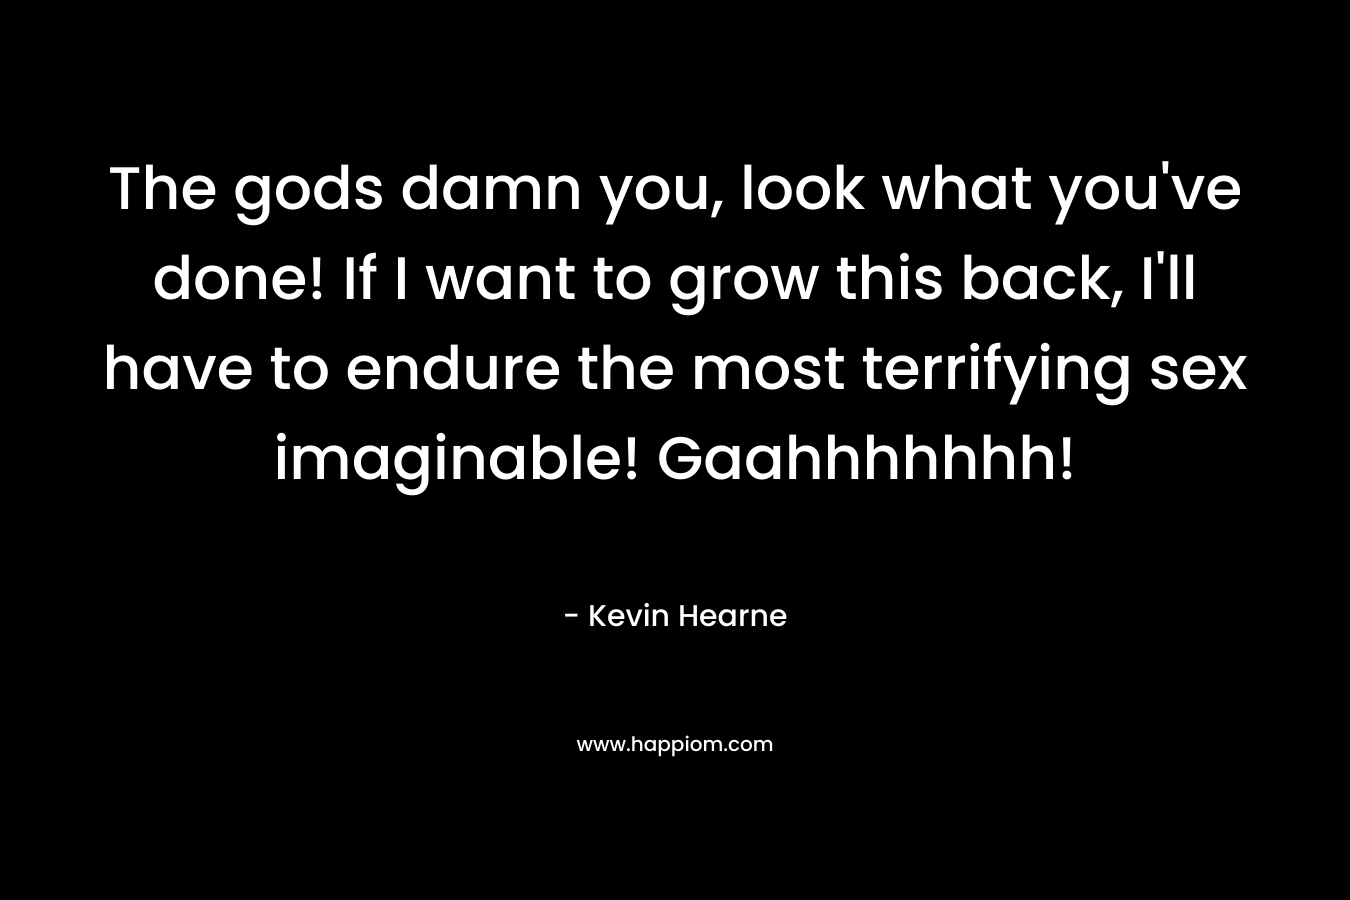 The gods damn you, look what you’ve done! If I want to grow this back, I’ll have to endure the most terrifying sex imaginable! Gaahhhhhhh! – Kevin Hearne